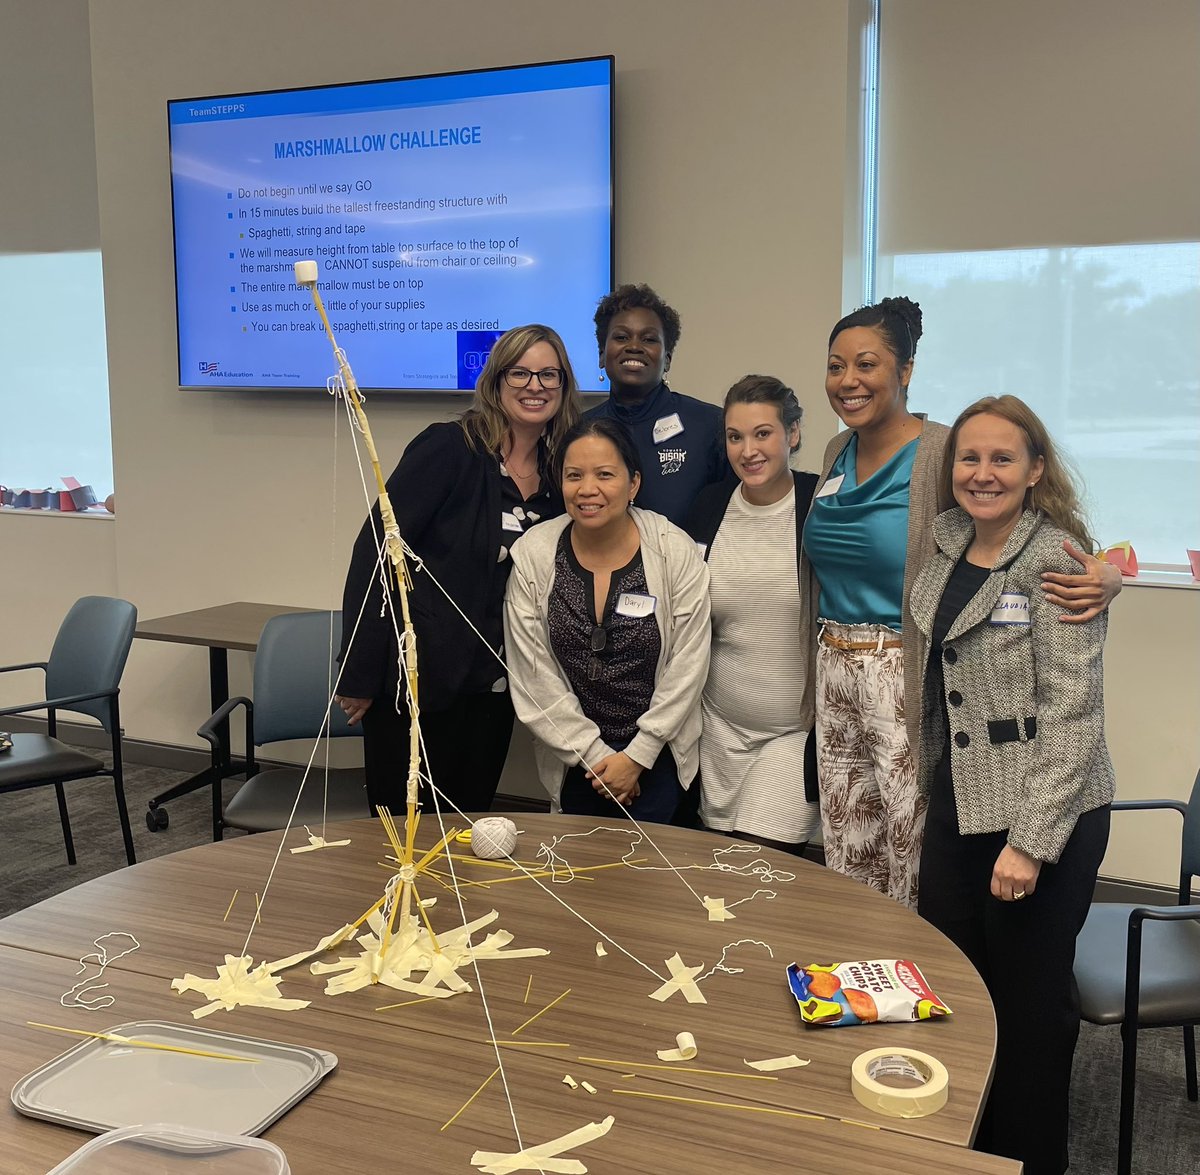 Yesterday members of the Education & Training division kicked off day one of AHA TeamSTEPPS training. It was an amazing day of learning & teaming. Our group even won the marshmallow challenge. I’m looking forward to another exciting day today.